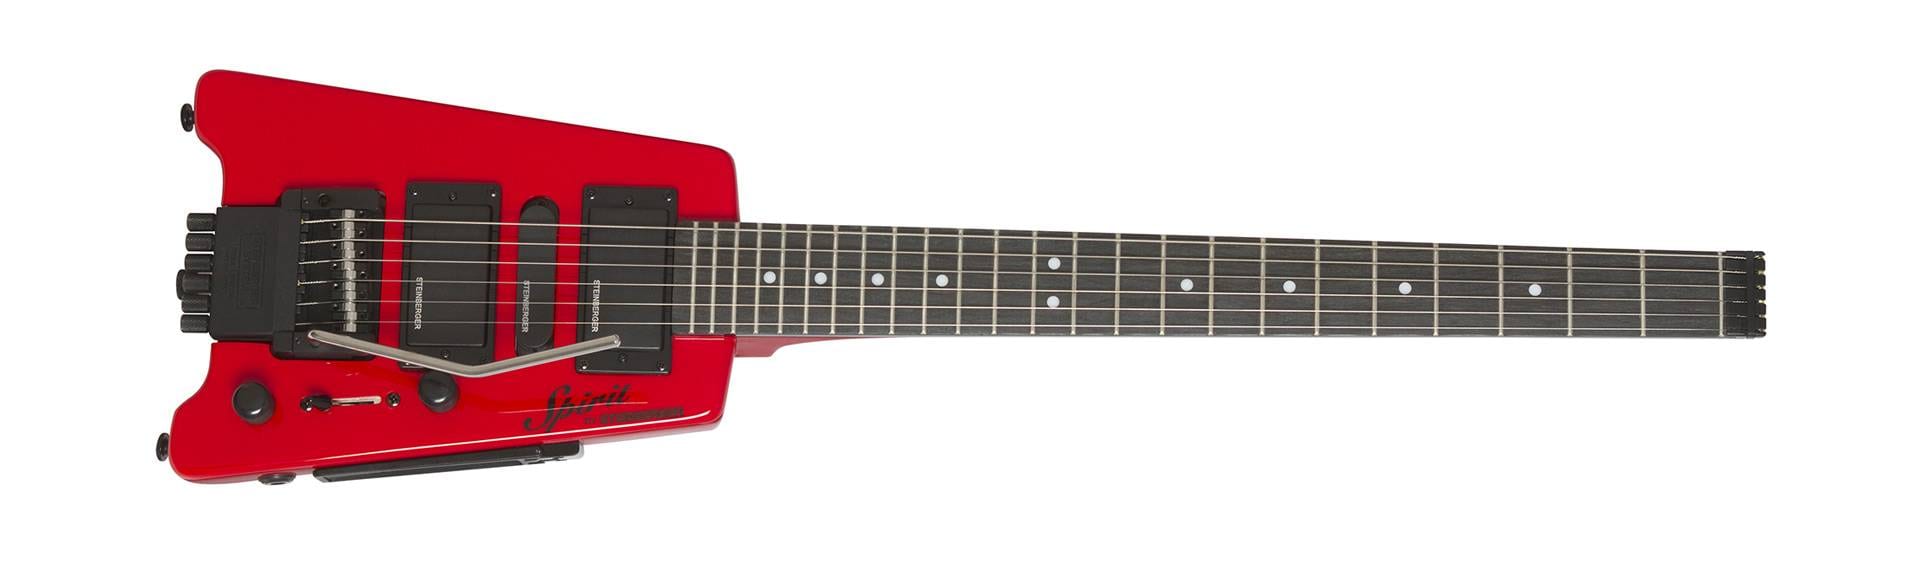 GT Pro Deluxe in Hot Rod Red 